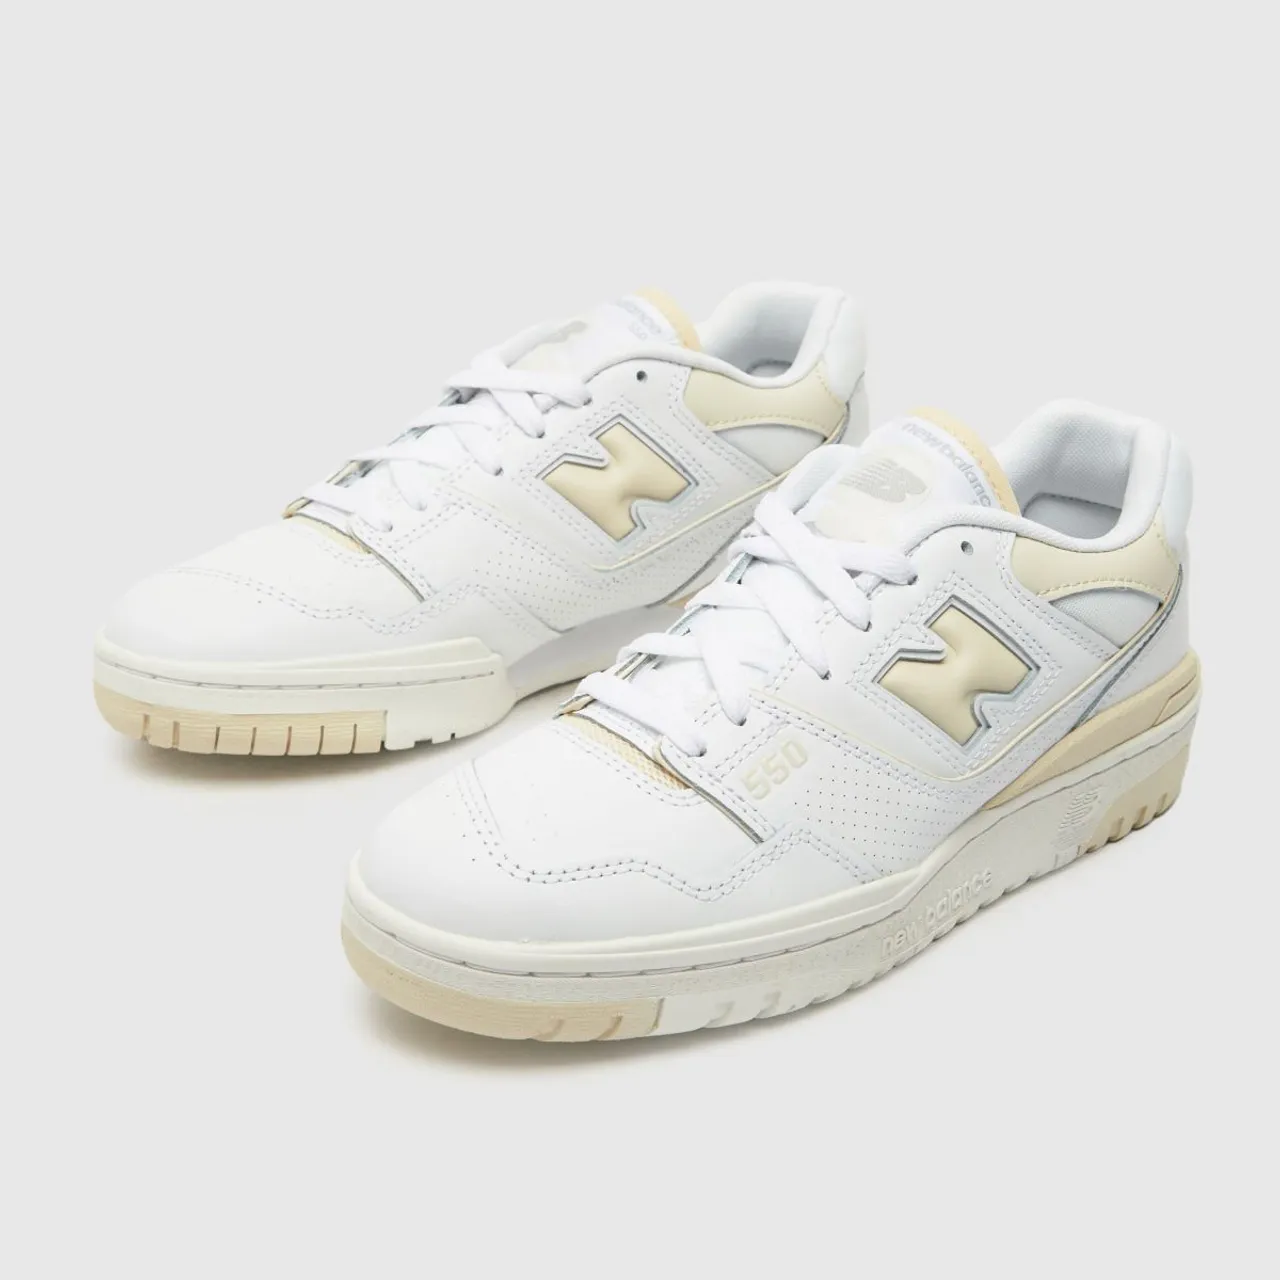 New Balance 550 Trainers In White & Beige